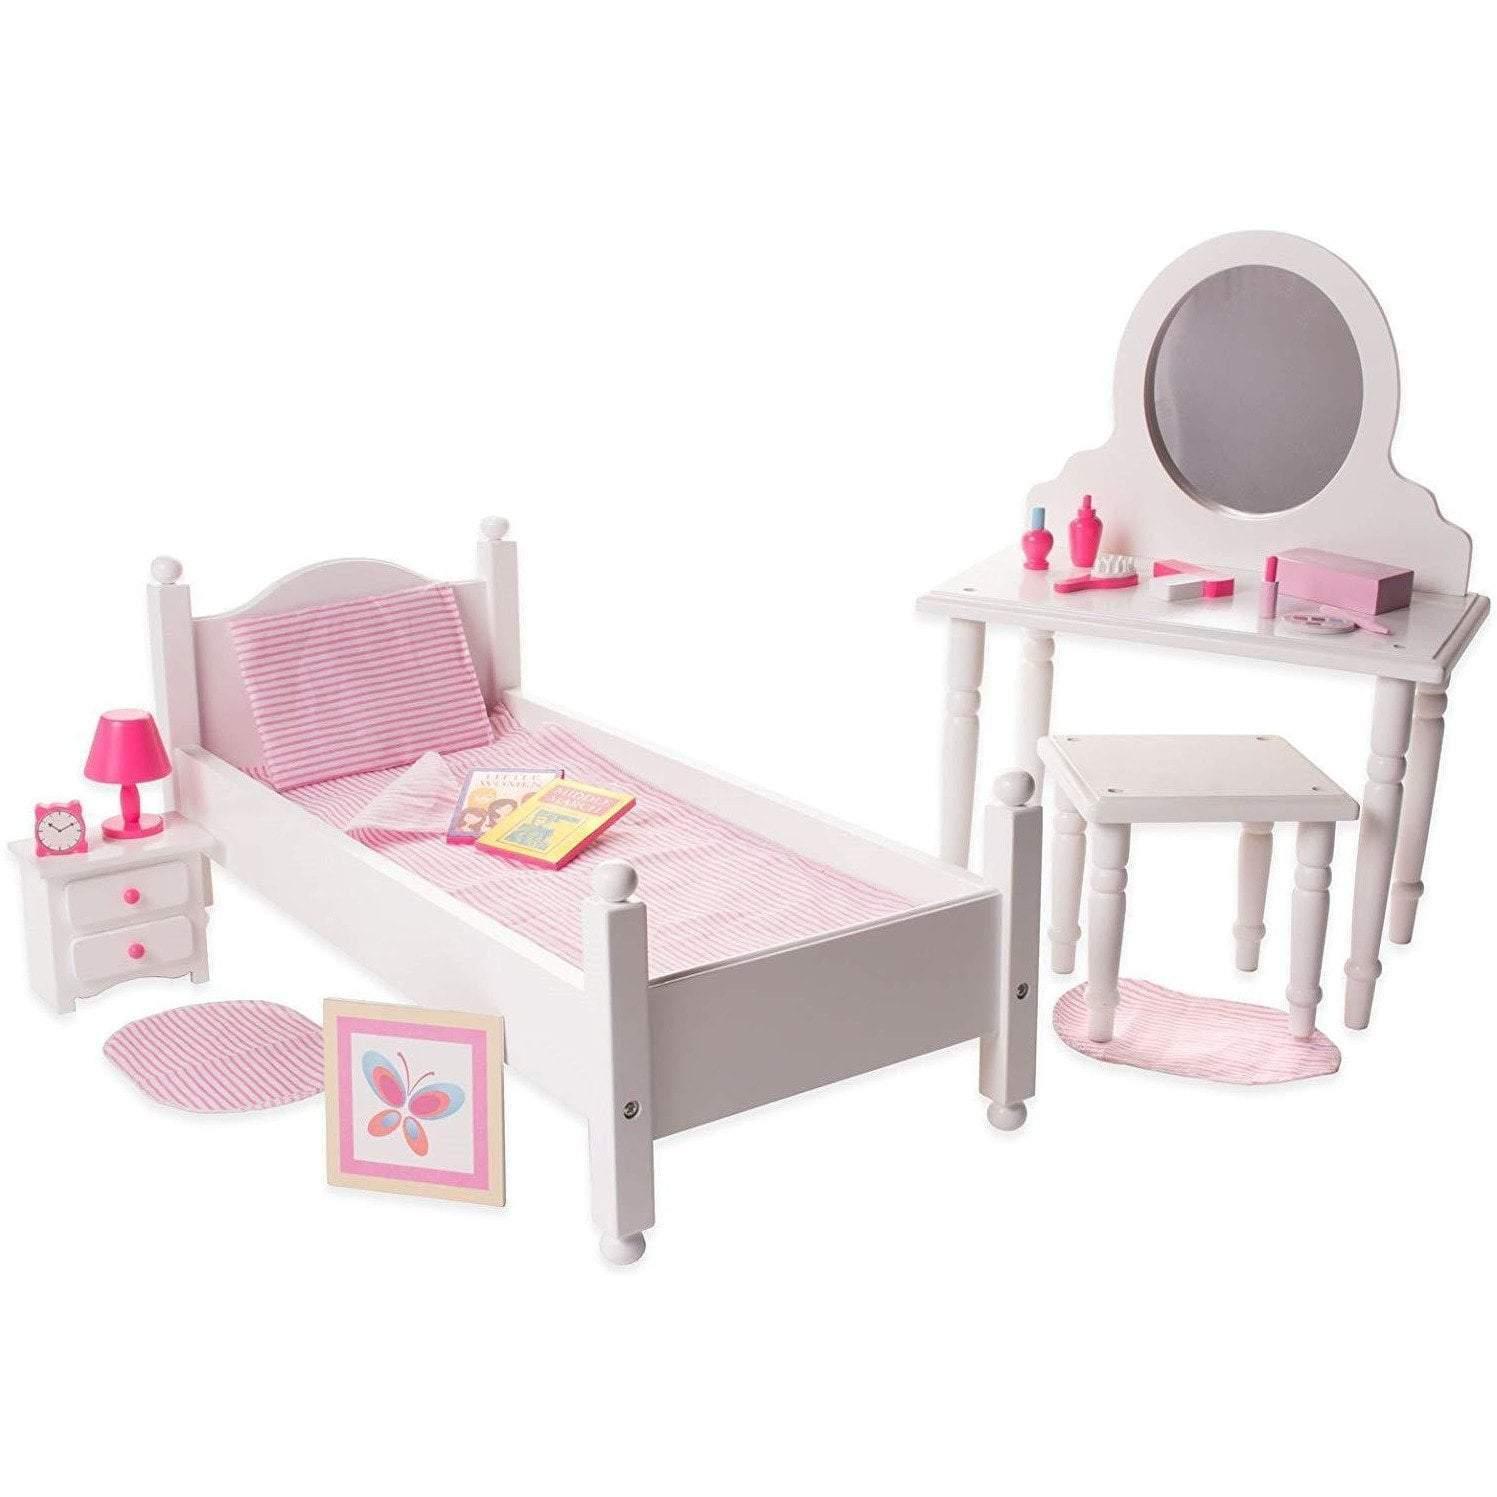 18 inch Doll Bed Vanity Set with Accessories Playtime by Eimmie